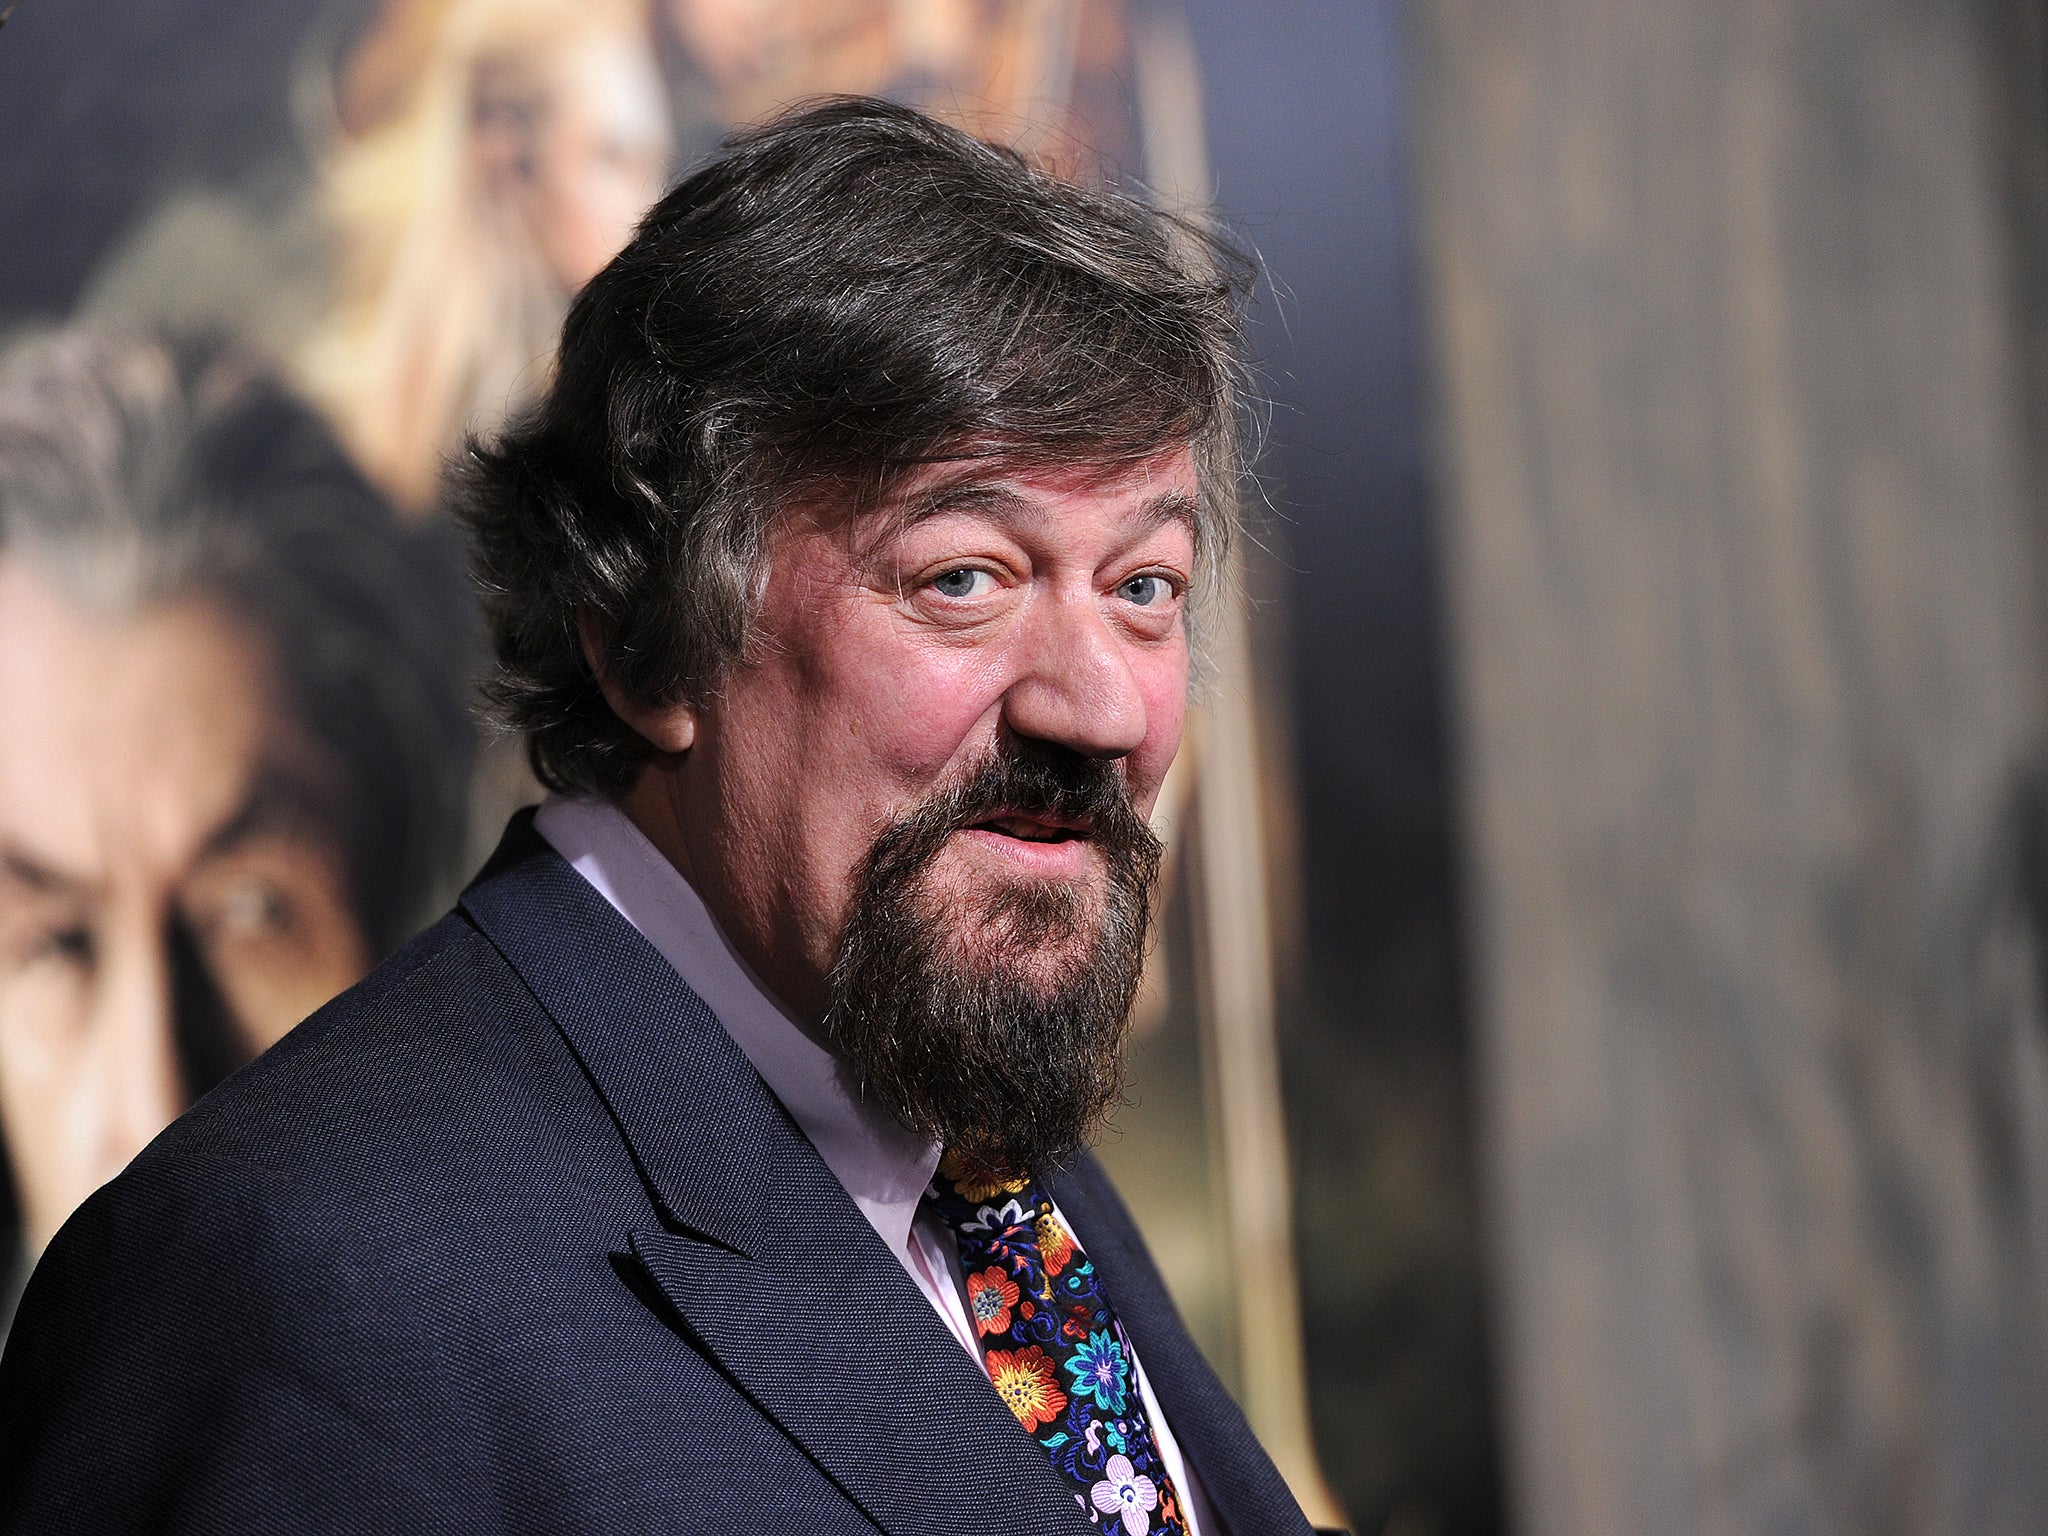 Stephen Fry has spoken of his cocaine use at the palace again, and his thoughts on children with husband Elliot Spencer